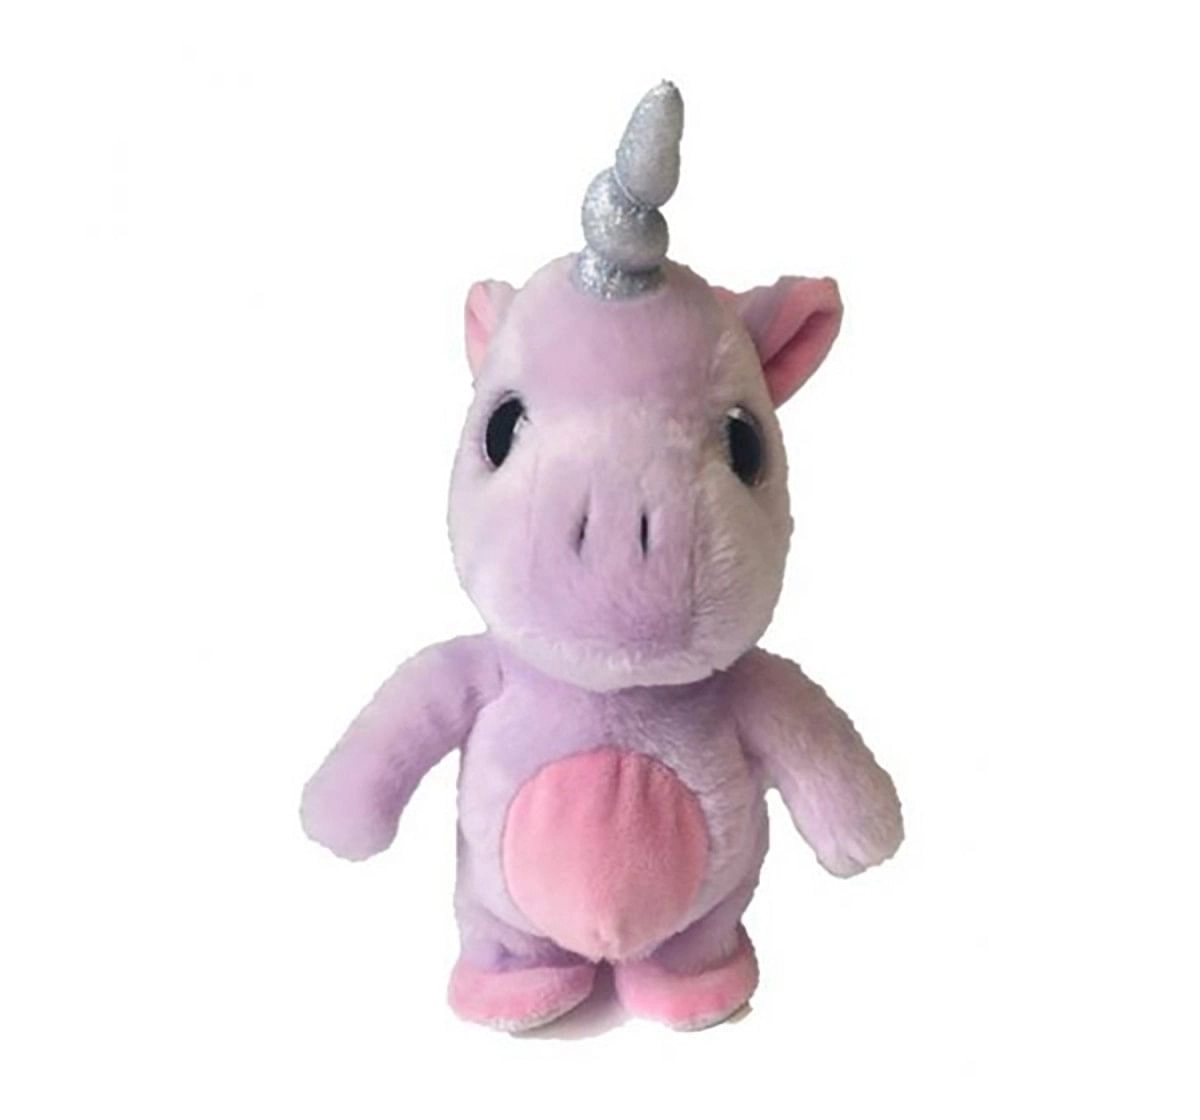 Hamleys Walking And Talking Unicorn-Teal Interactive Soft Toys for Kids age 18M + - 10 Cm (White)